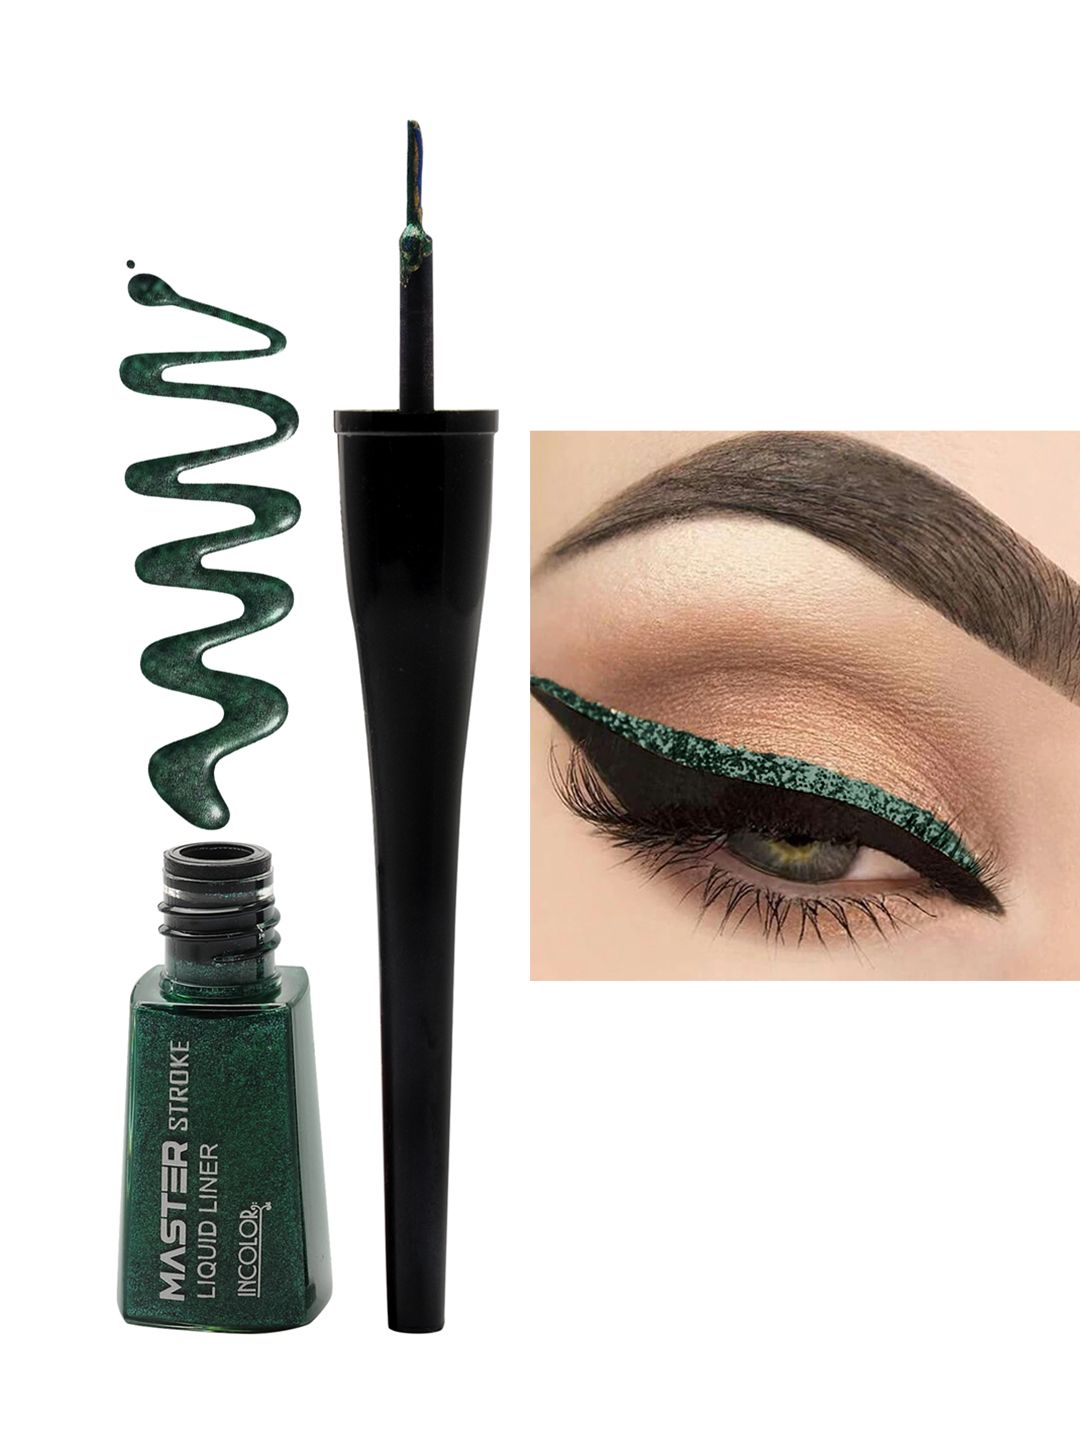 INCOLOR Master Stroke Liquid Eyeliner - 06 Teal Price in India